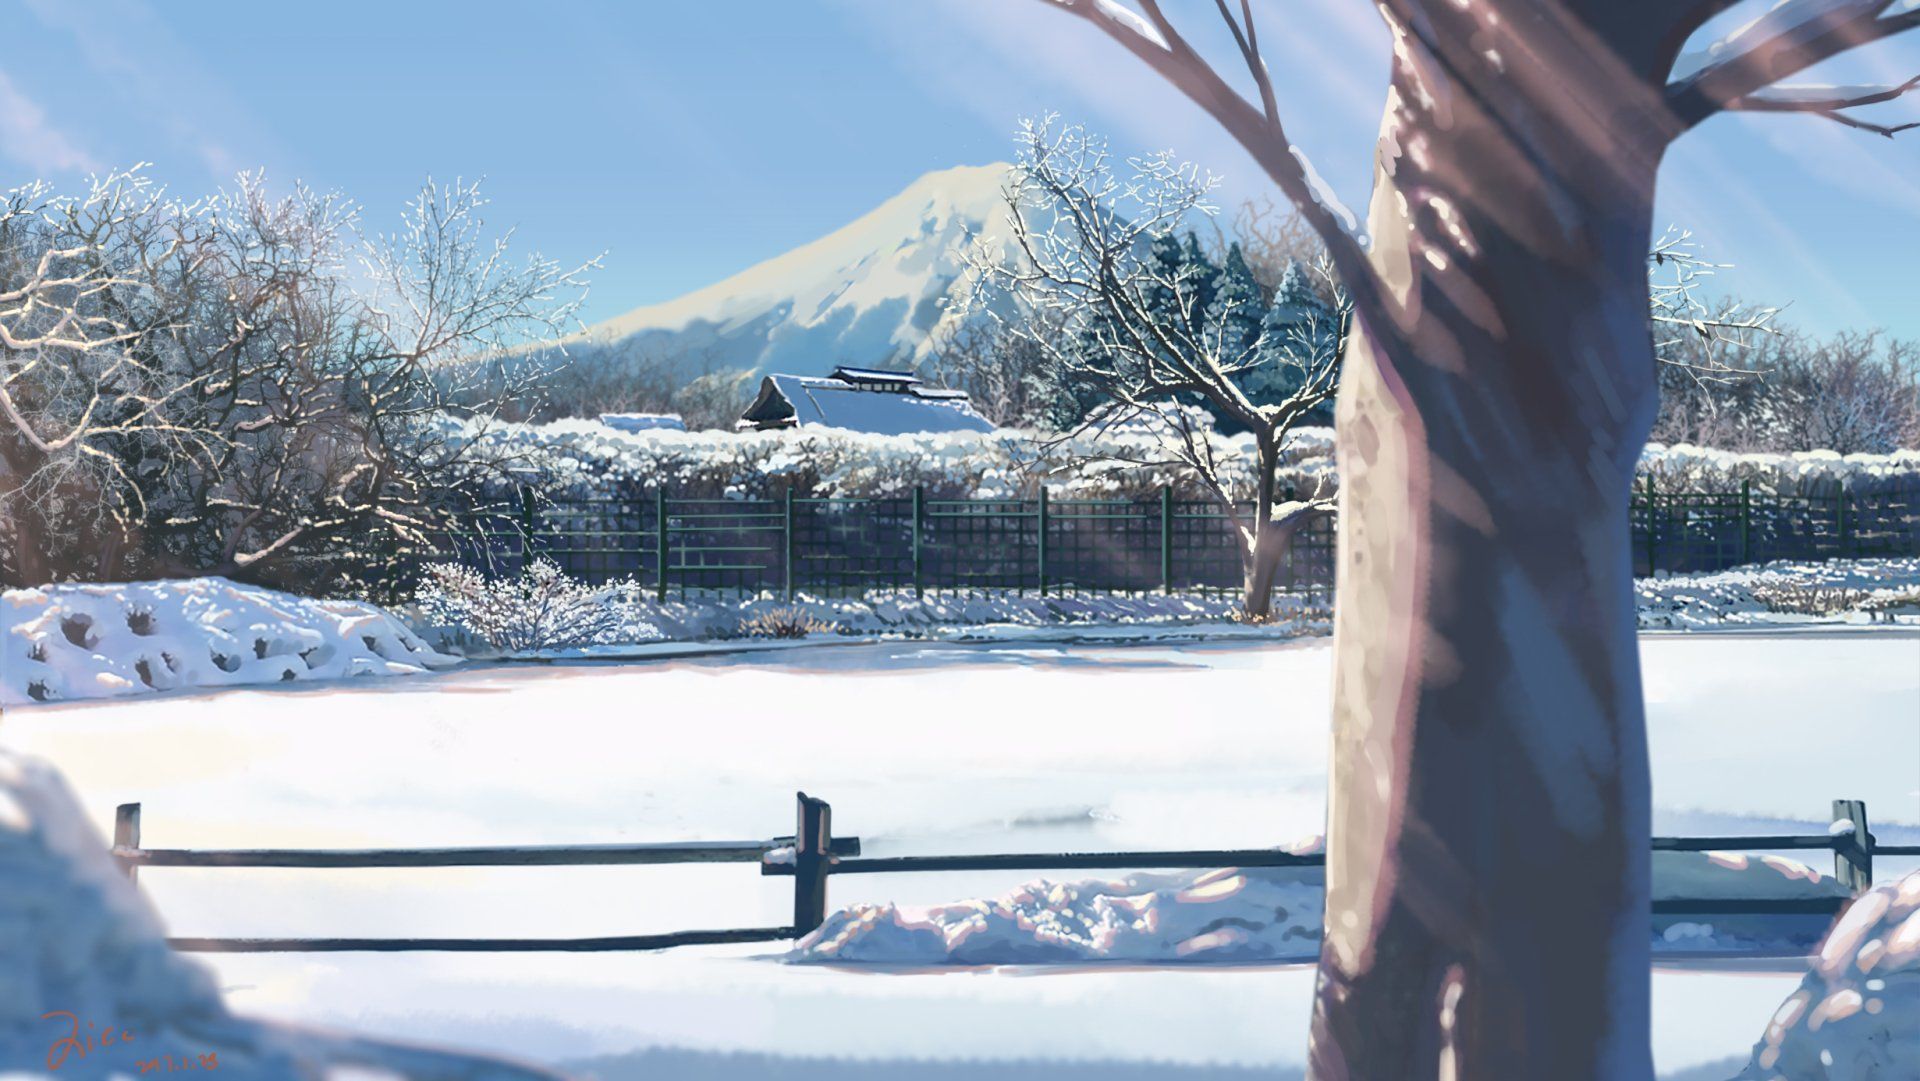 Background Image. Click pic to full HD #winteranime #winter #art #anime #backgr. Image. Cli. Anime scenery, Anime background, Episode background